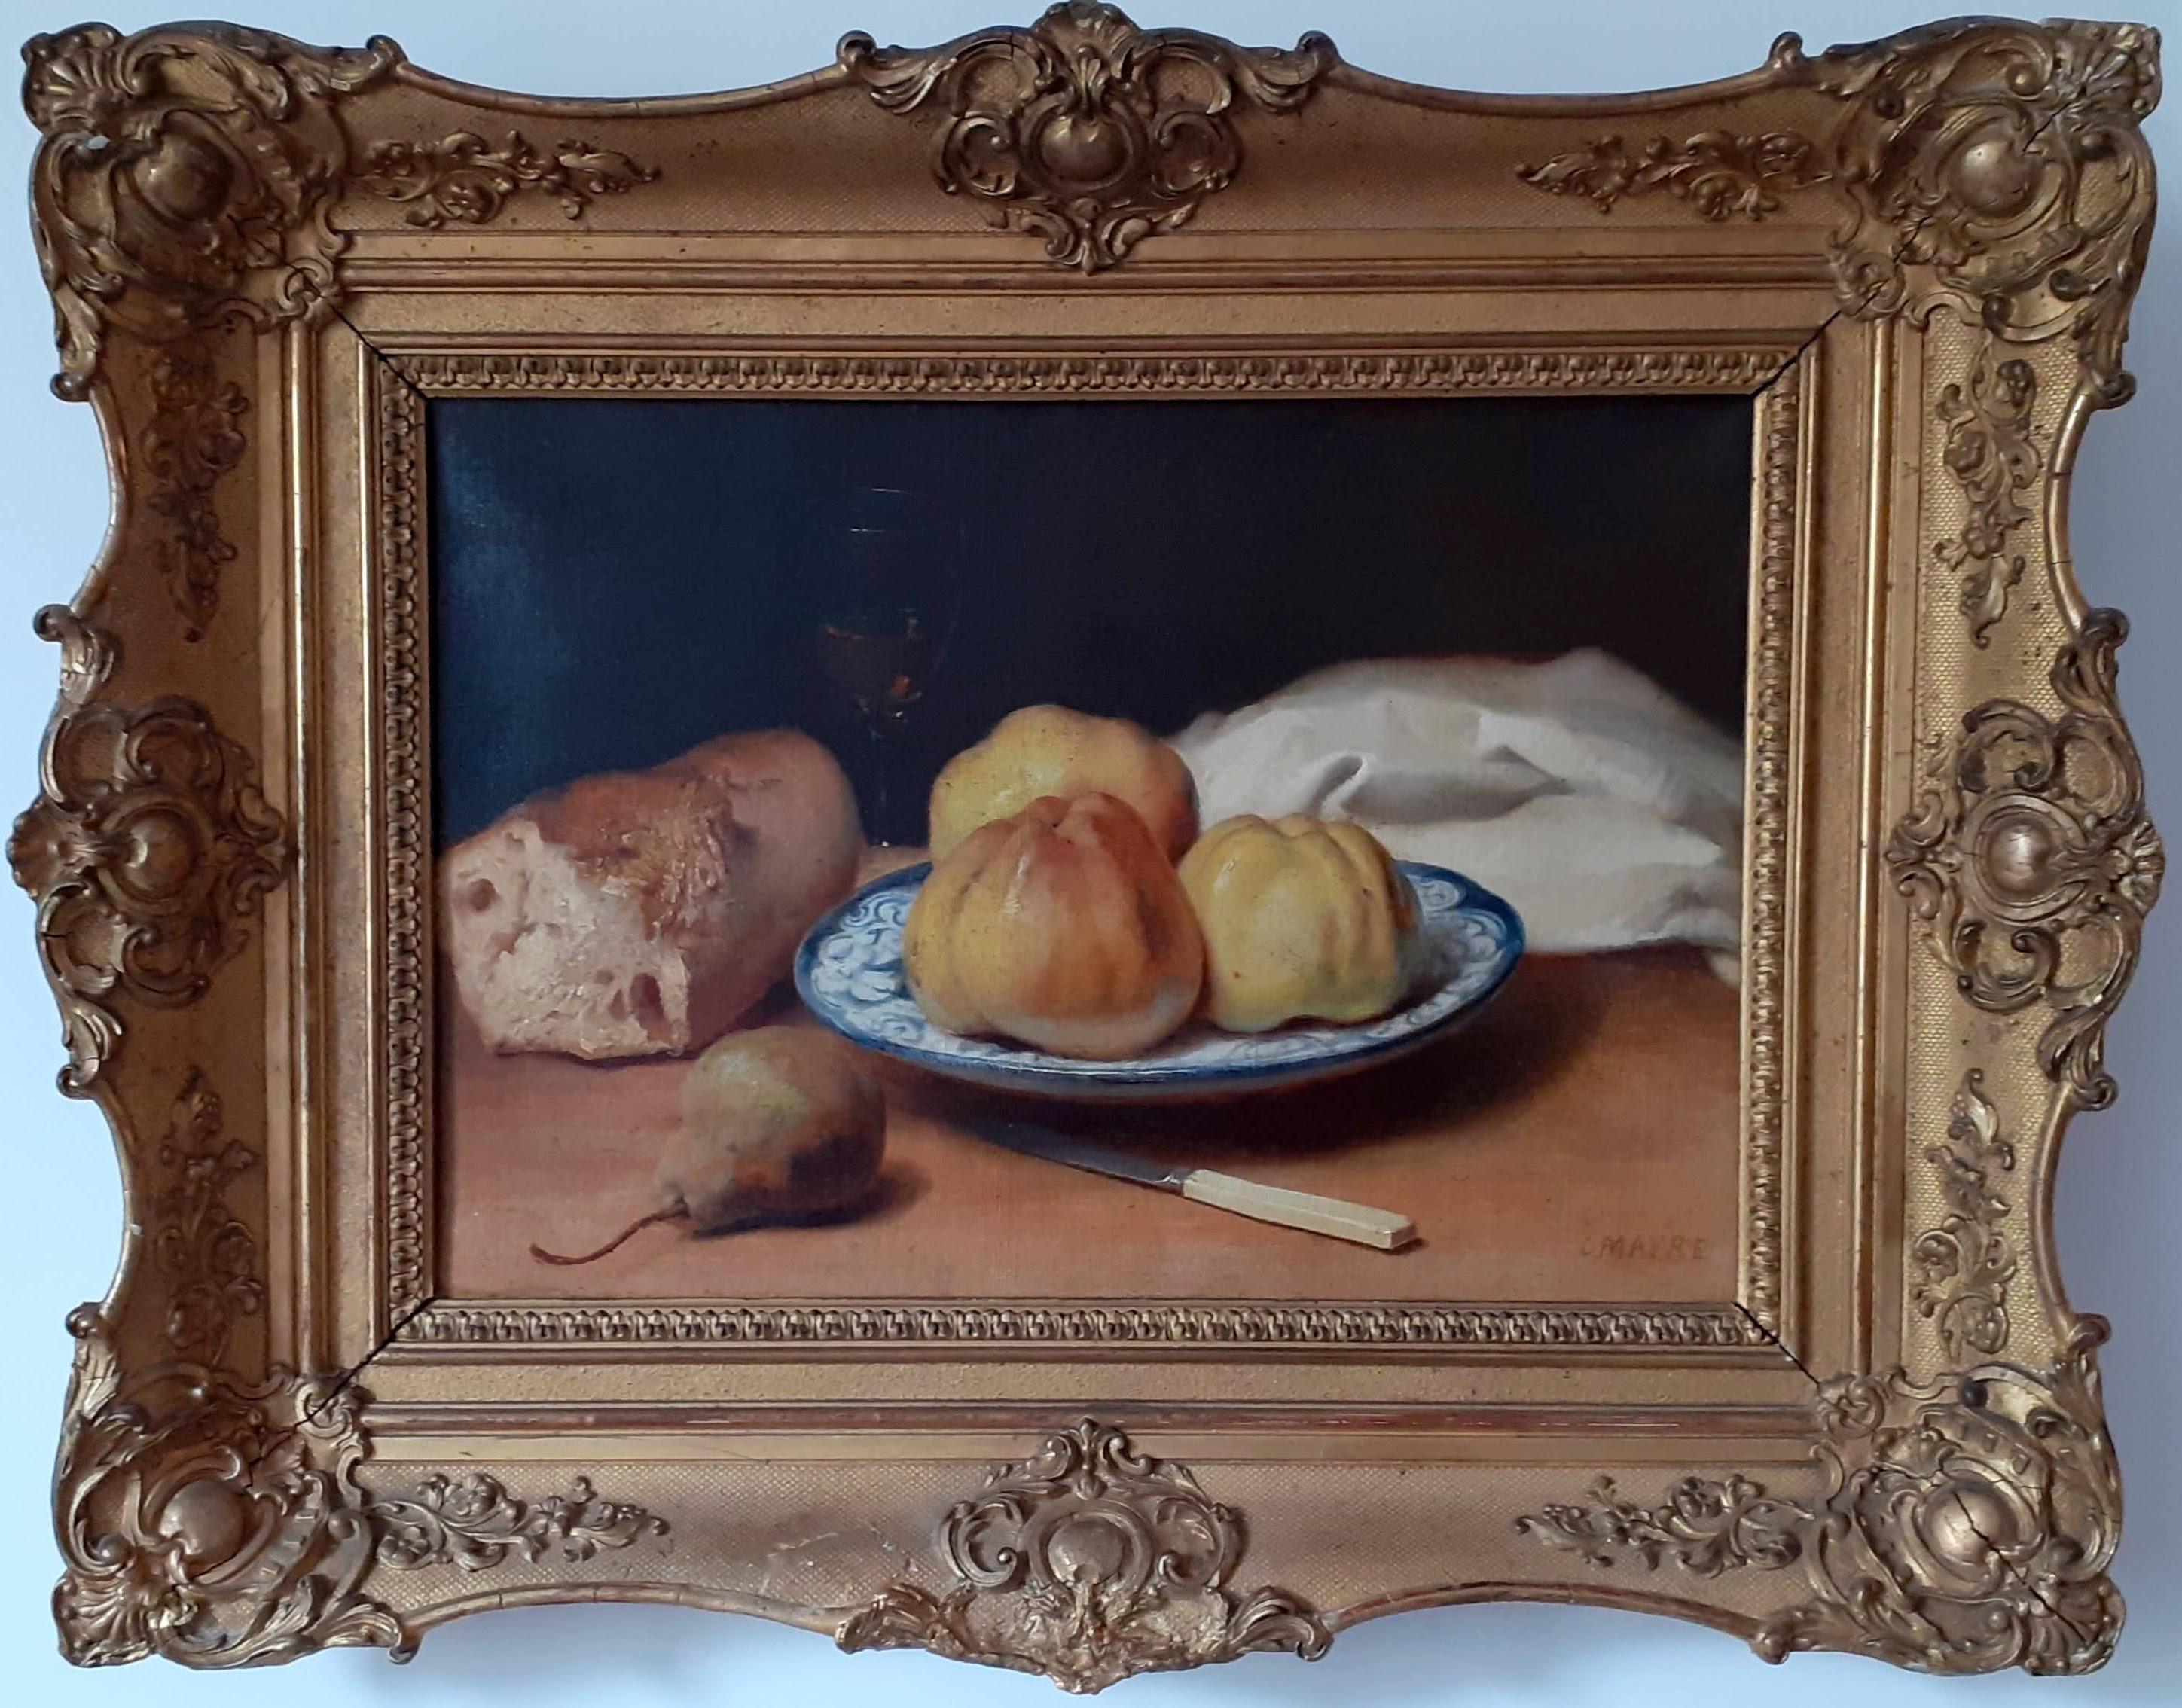 Rustic Apples and Bread Food Still Life French Salon Academic Antique Painting  